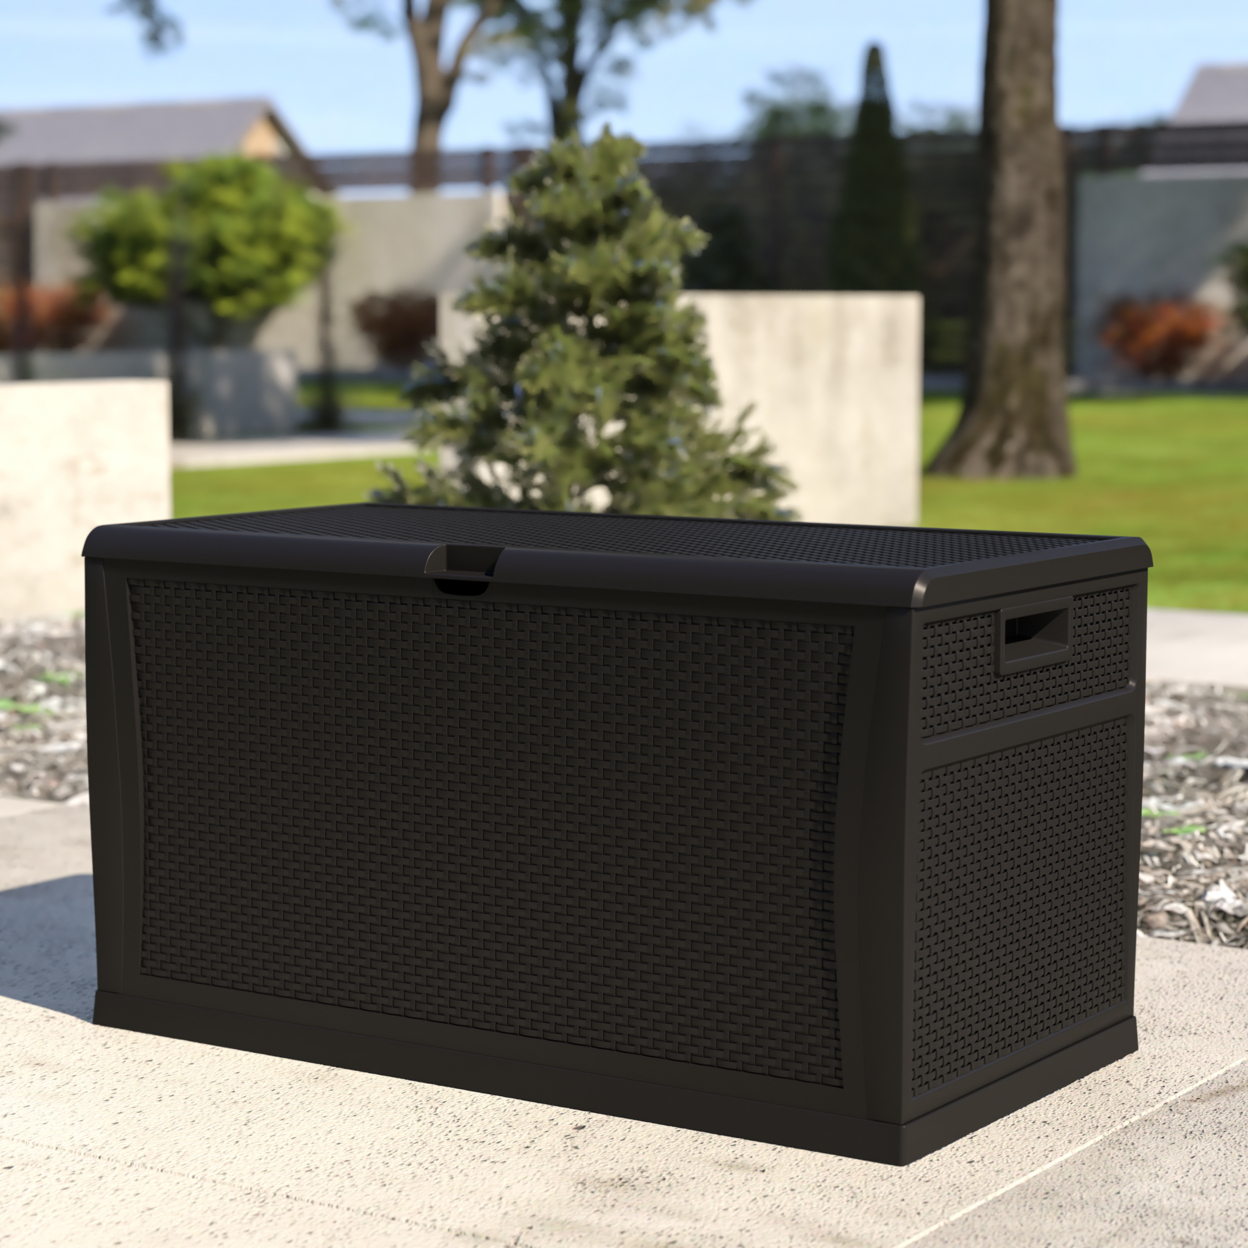 120 Gallon Plastic Deck Box - Outdoor Waterproof Storage Box For Patio Cushions, Garden Tools And Pool Toys, Black